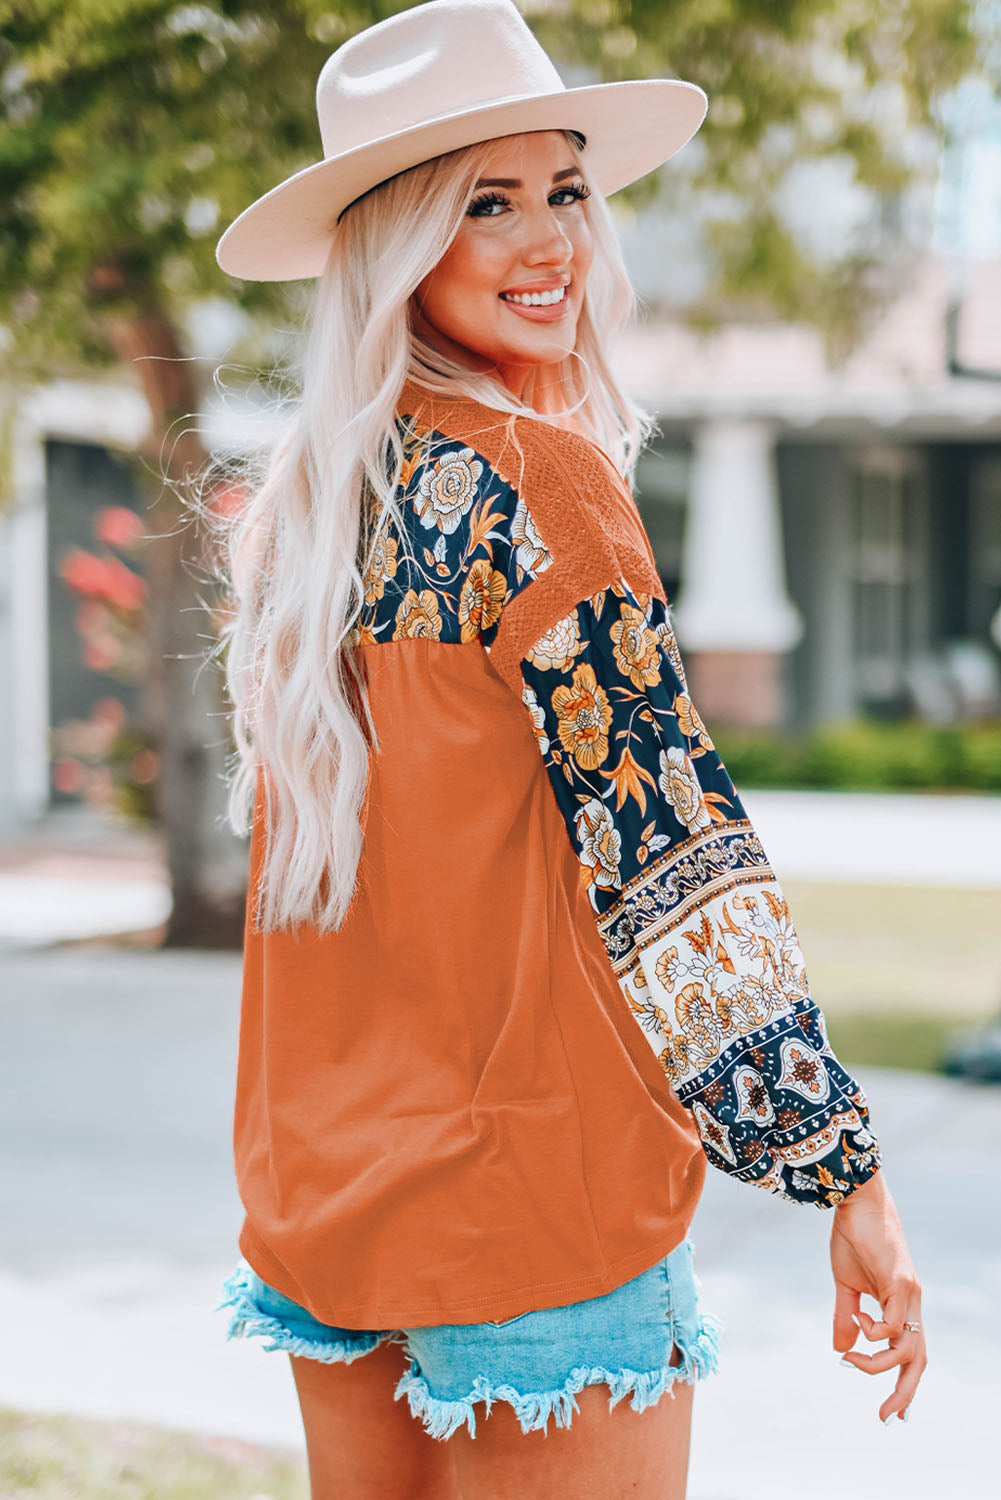 Brown Boho Floral Print Balloon Sleeve Top with Lace Details Long Sleeve Tops JT's Designer Fashion